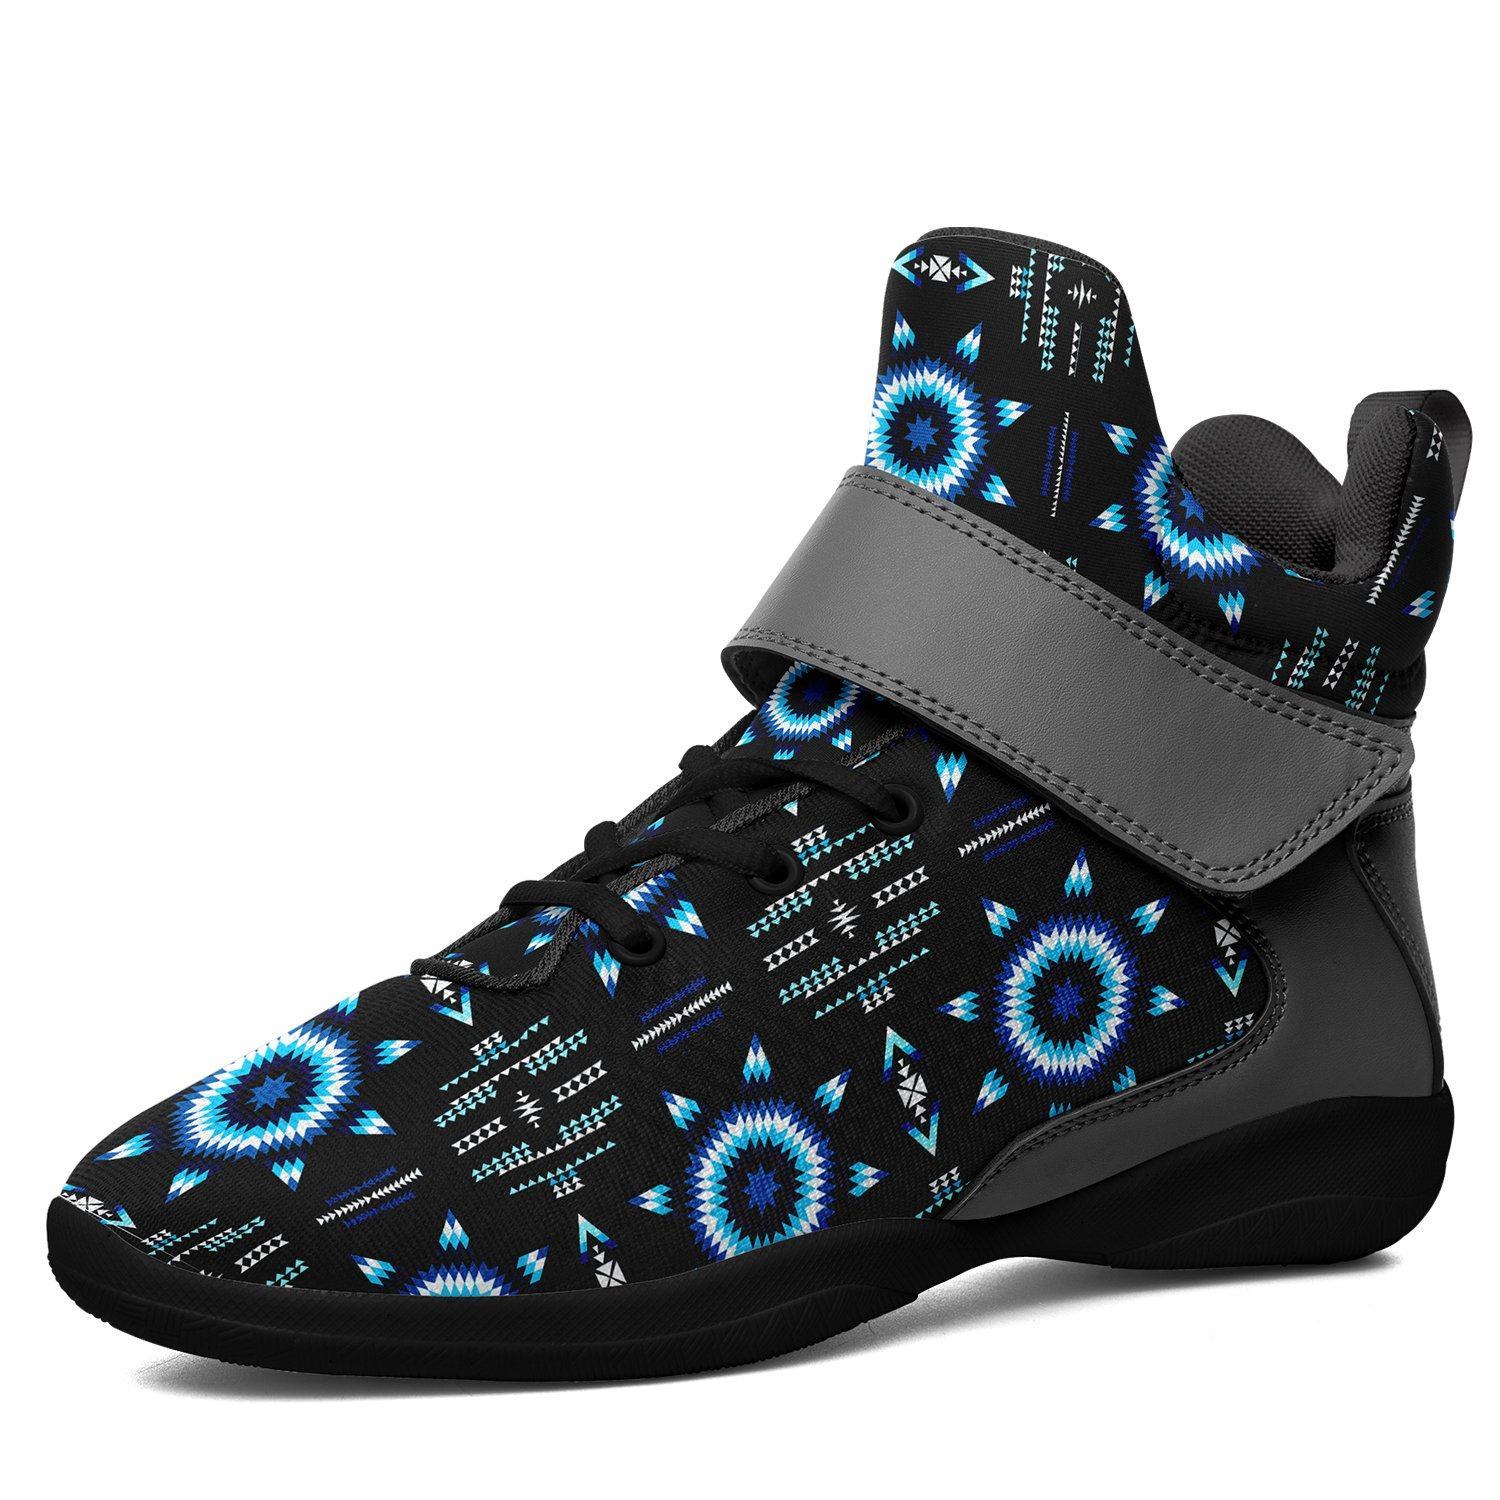 Rising Star Wolf Moon Ipottaa Basketball / Sport High Top Shoes - Black Sole 49 Dzine US Men 7 / EUR 40 Black Sole with Gray Strap 